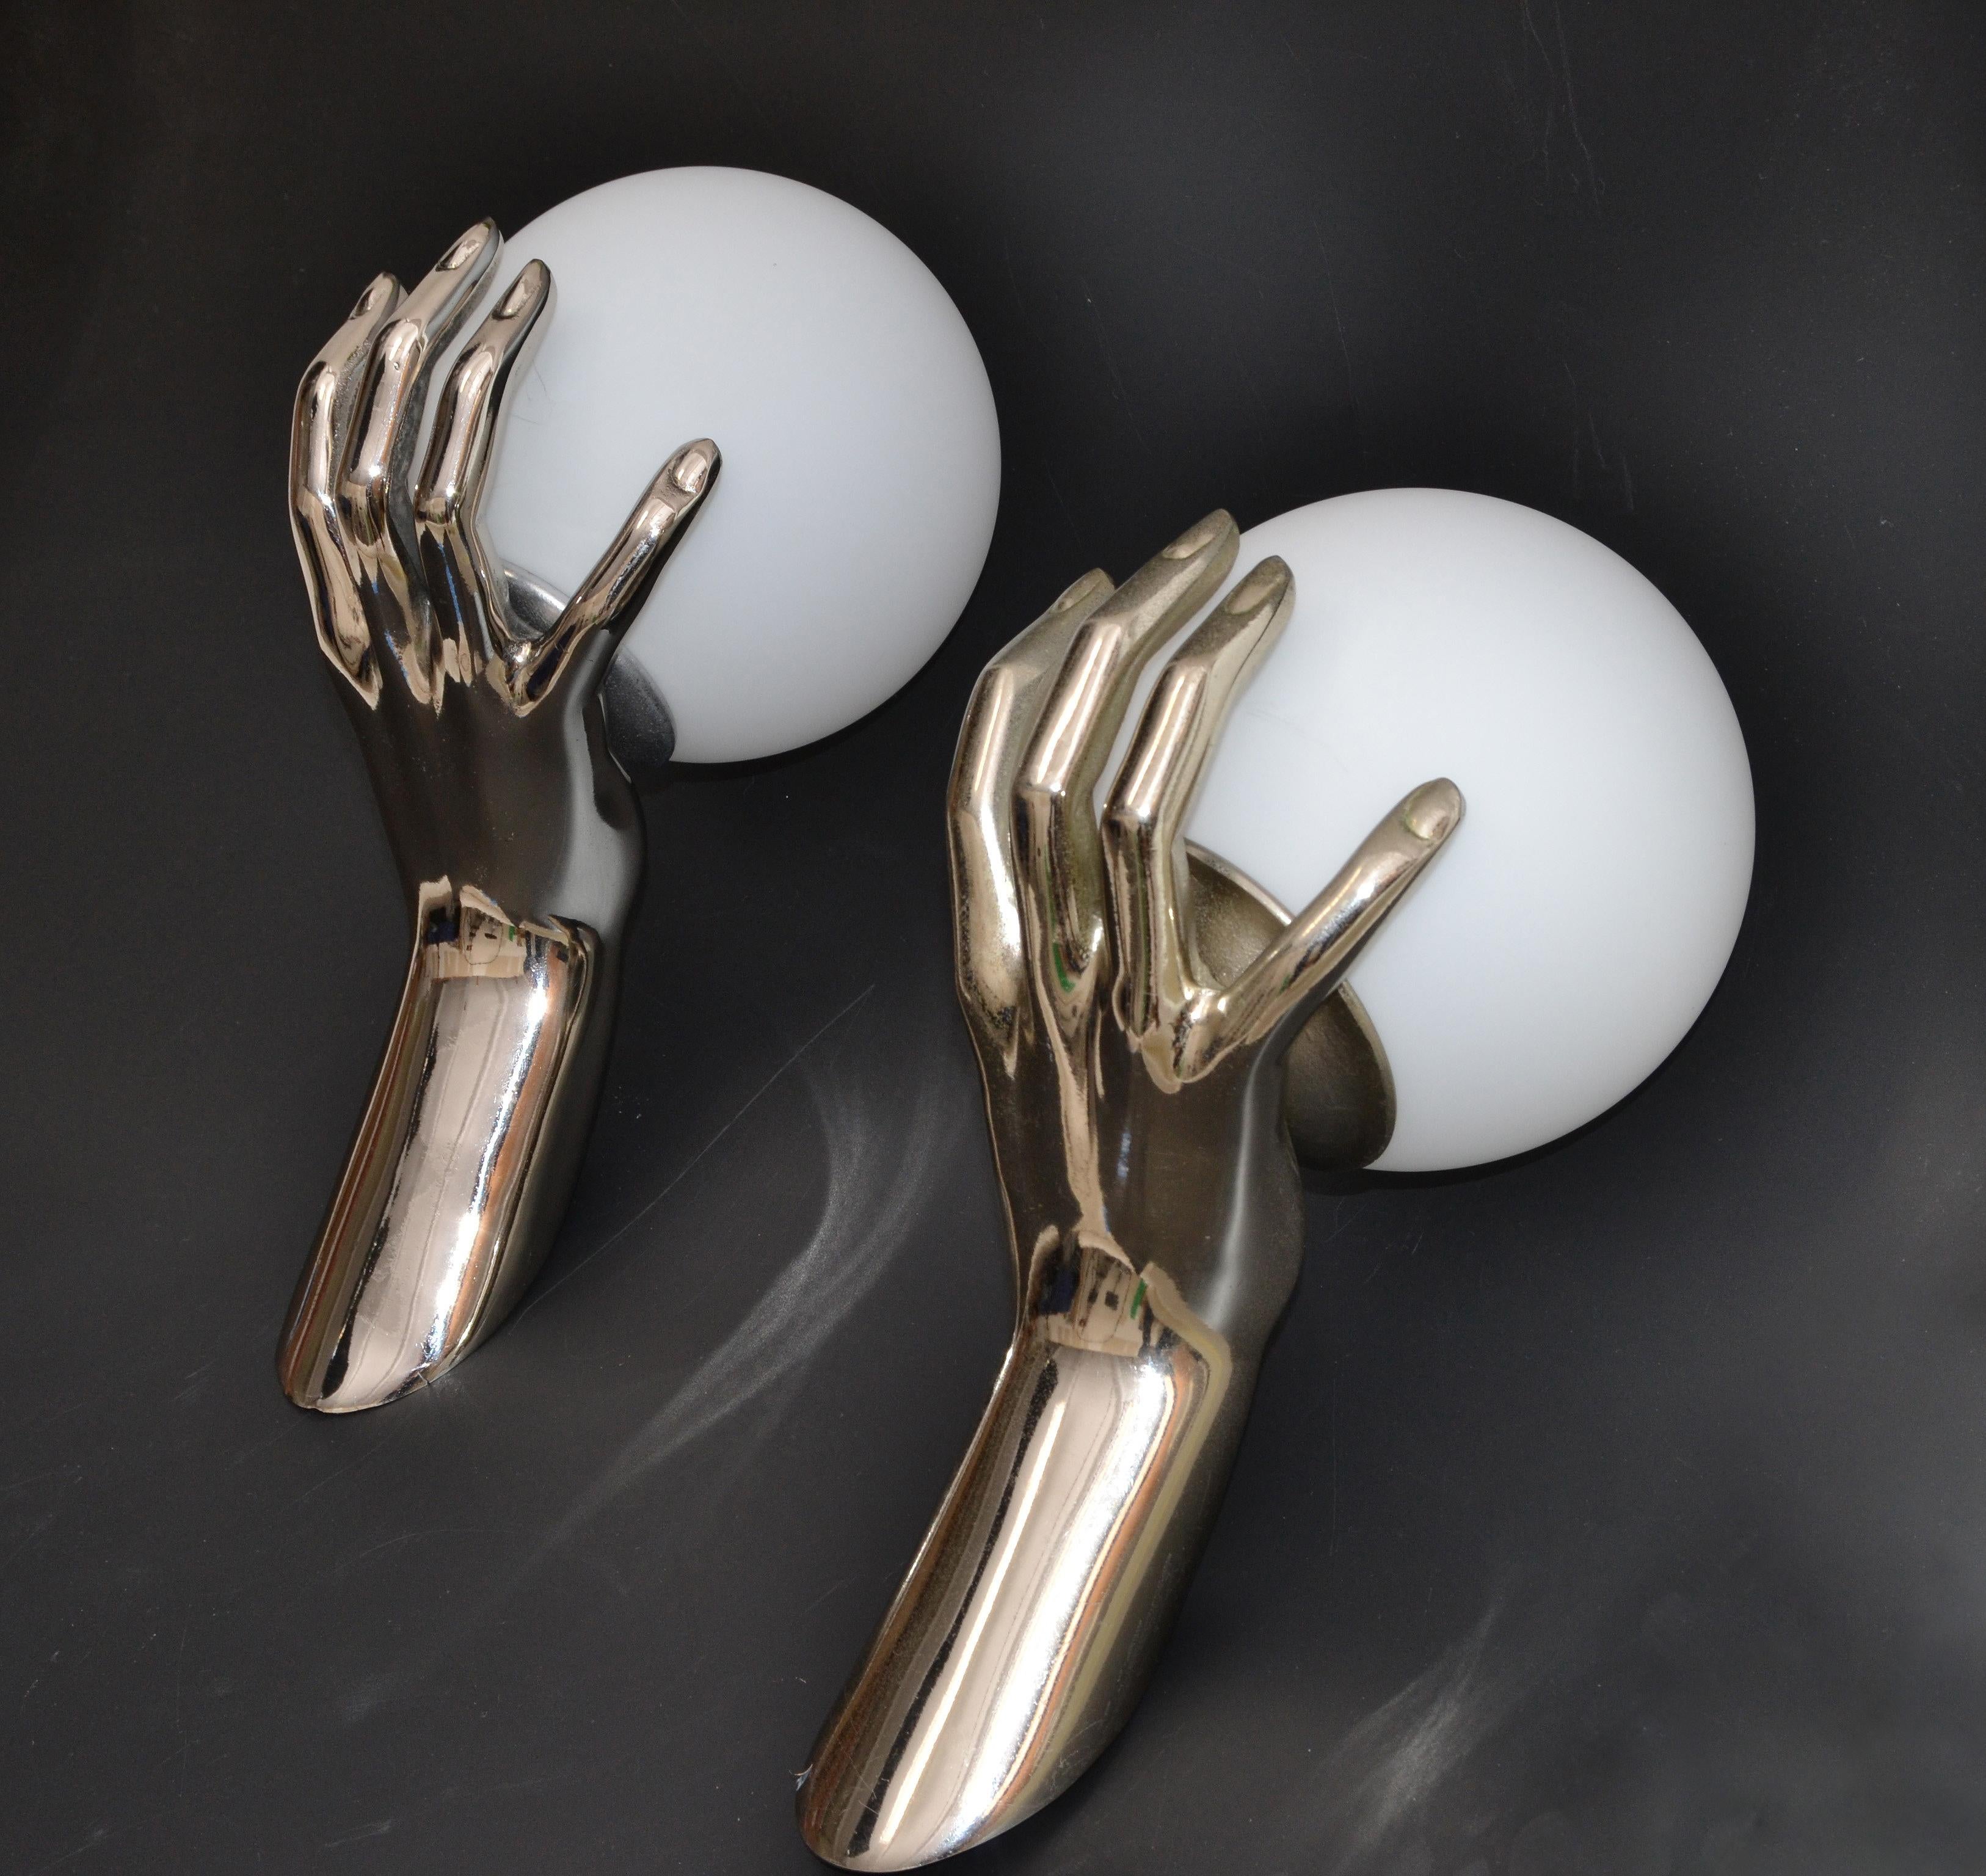 Plated Maison Arlus French Silver Patina Hand Sconces and White Opaline Shades, 1970